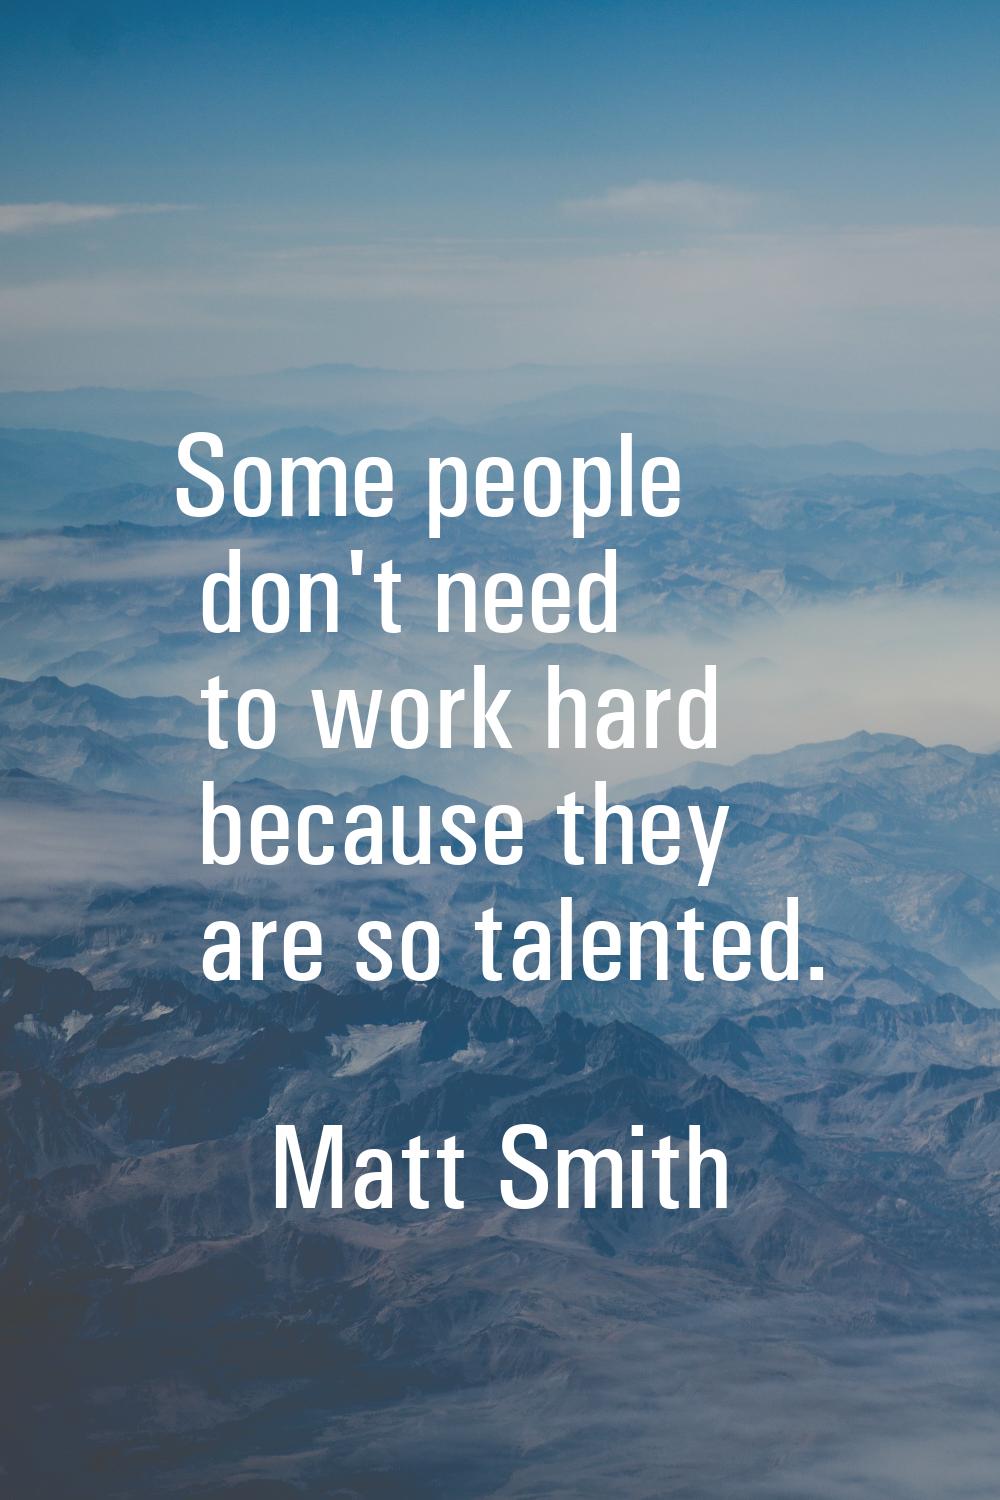 Some people don't need to work hard because they are so talented.